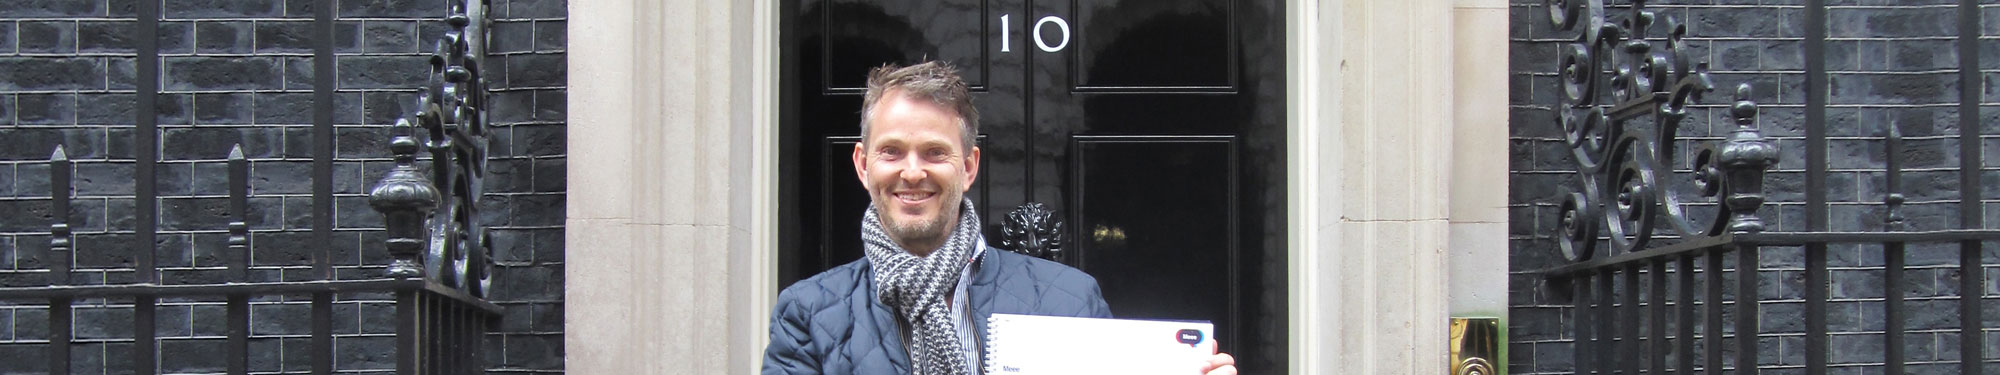 Sid Madge outside 10 Downing Street